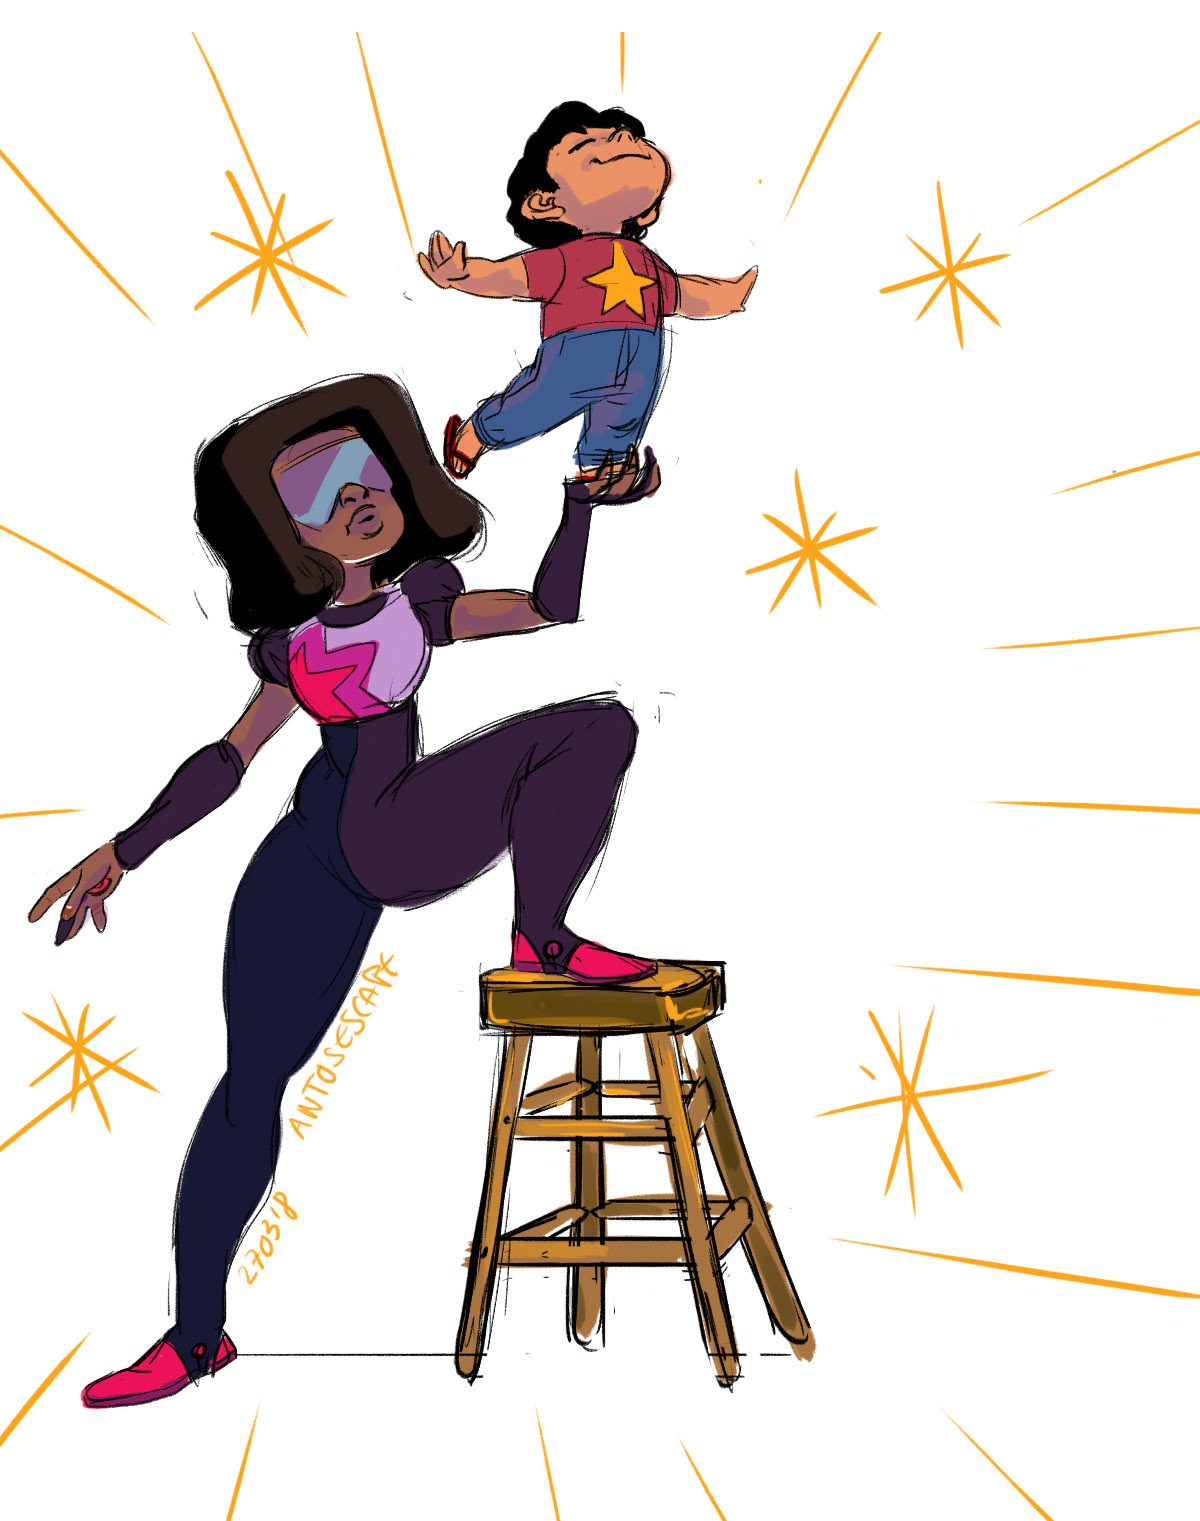 short stream this time! thank you if you dropped by! Garnet and steven in the new episodes are just gold!